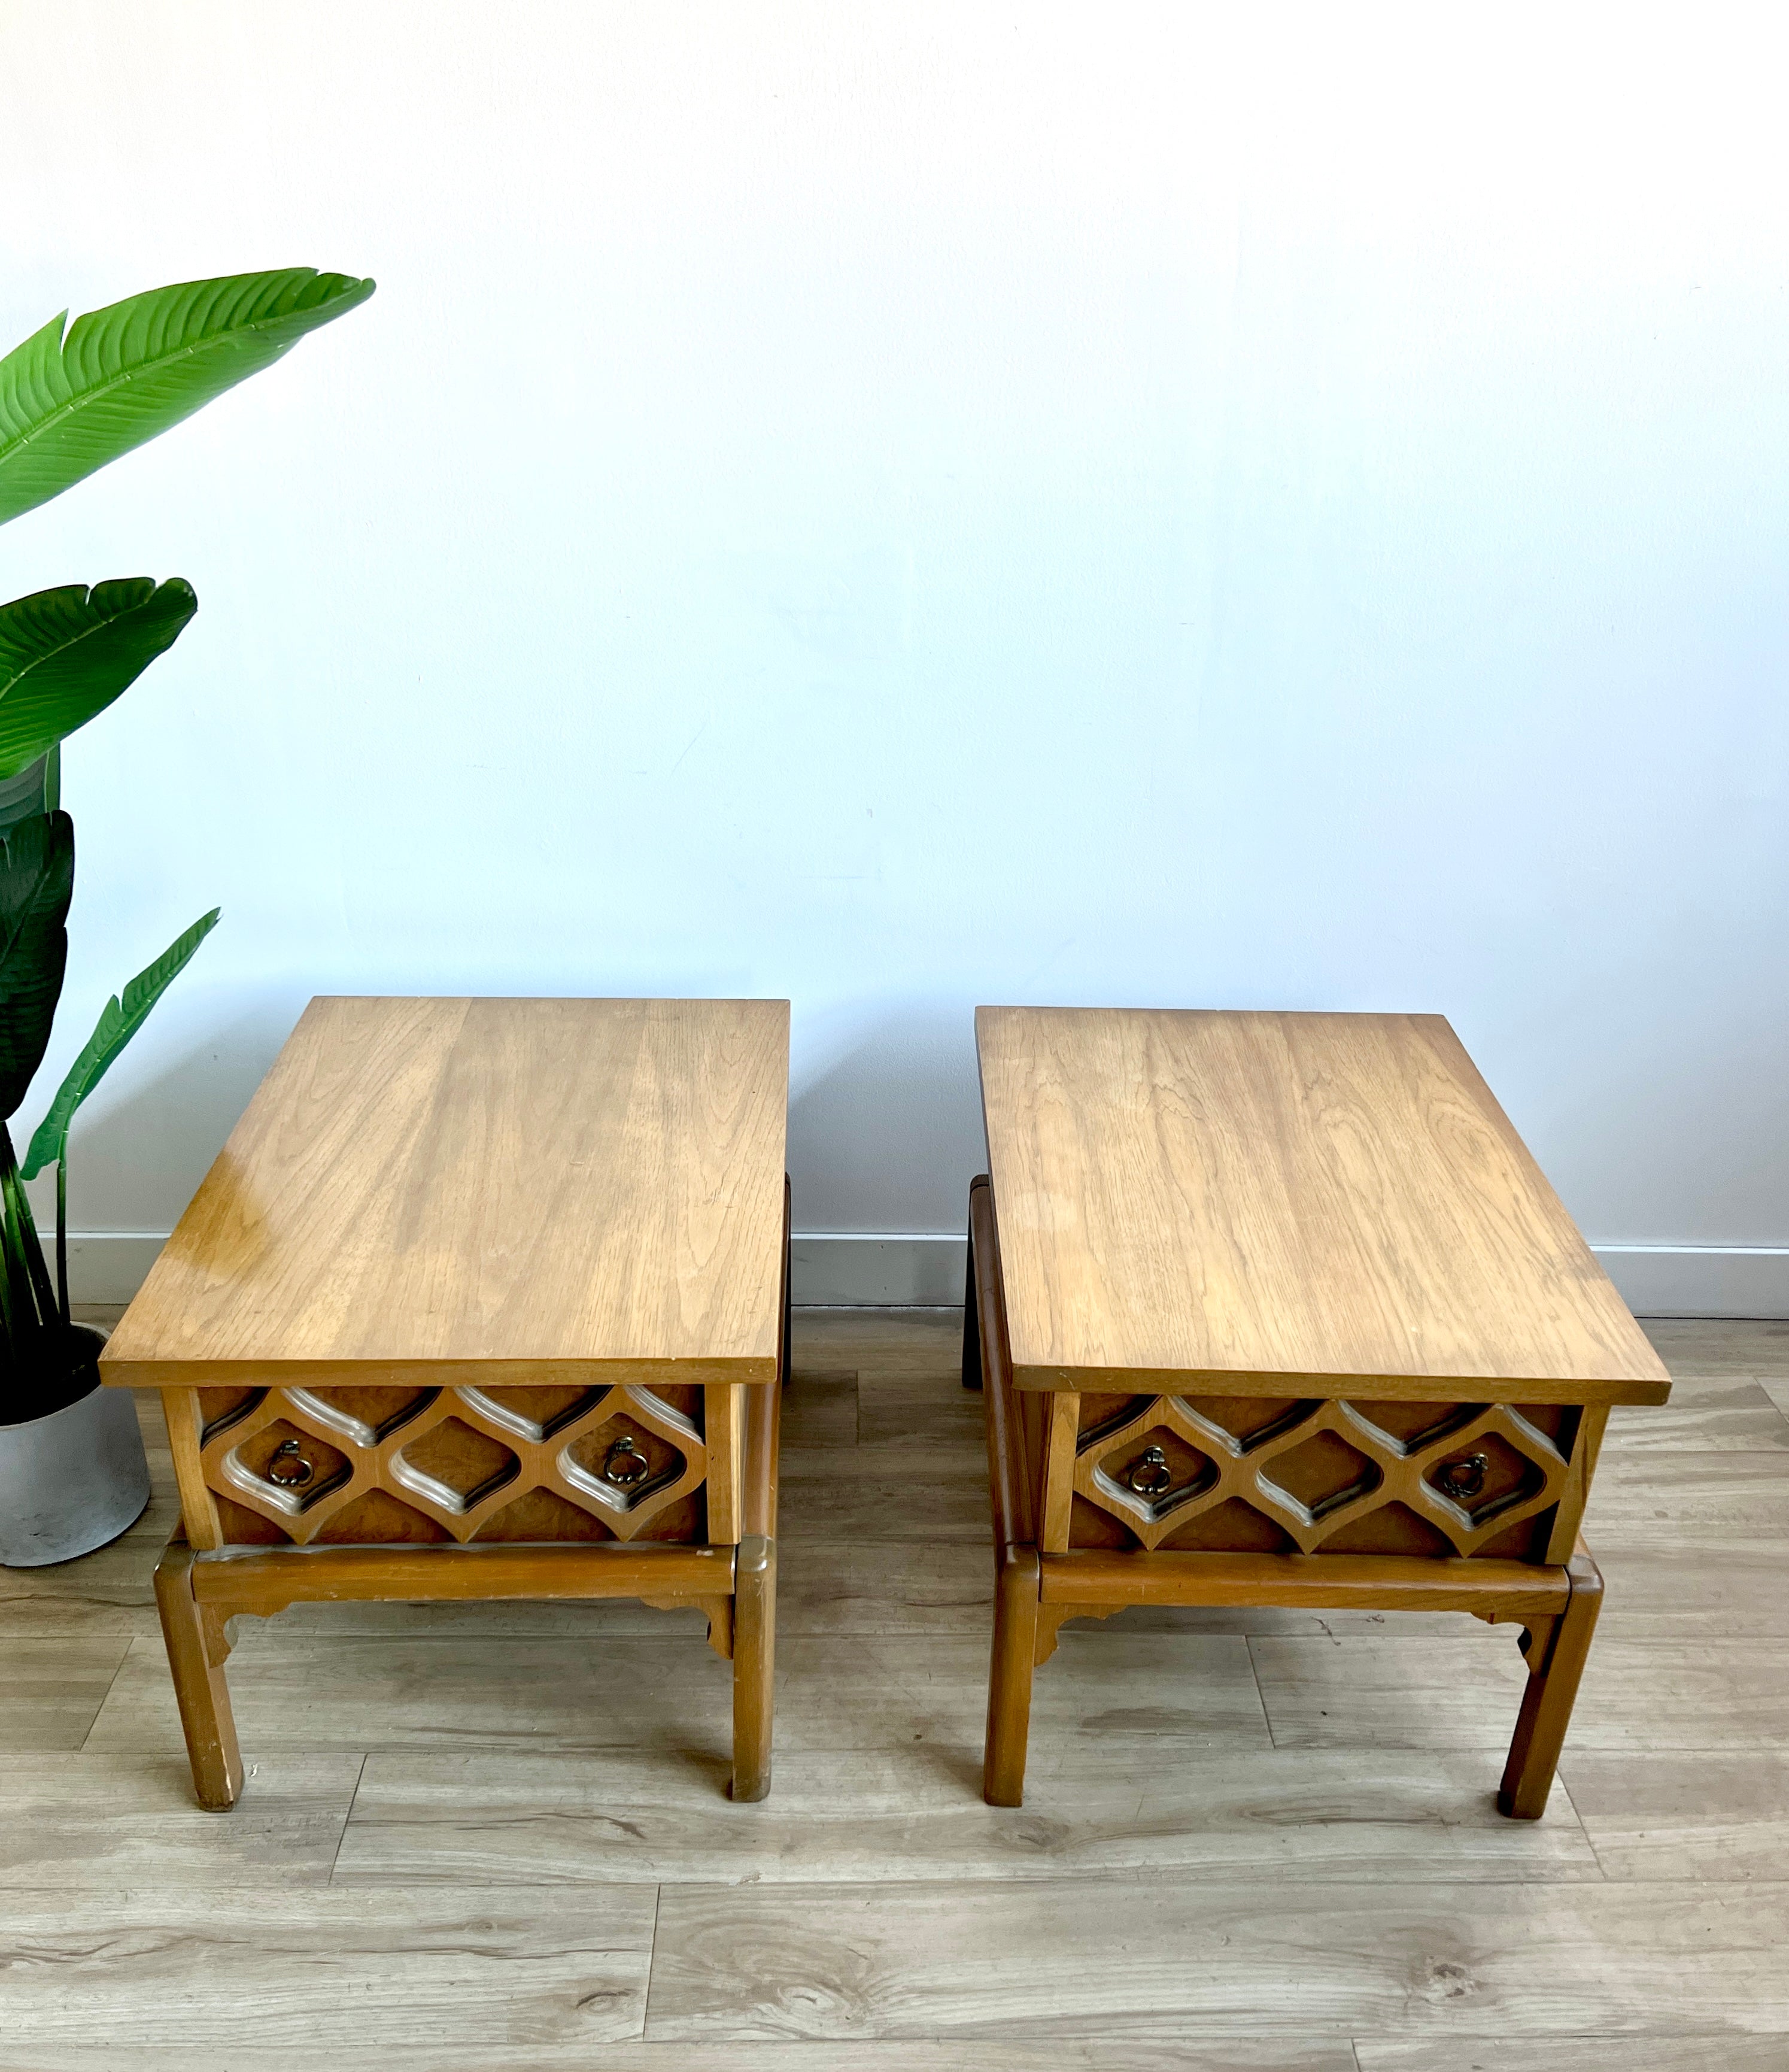 Pair of Vintage Moroccan Style Nightstands / End Tables